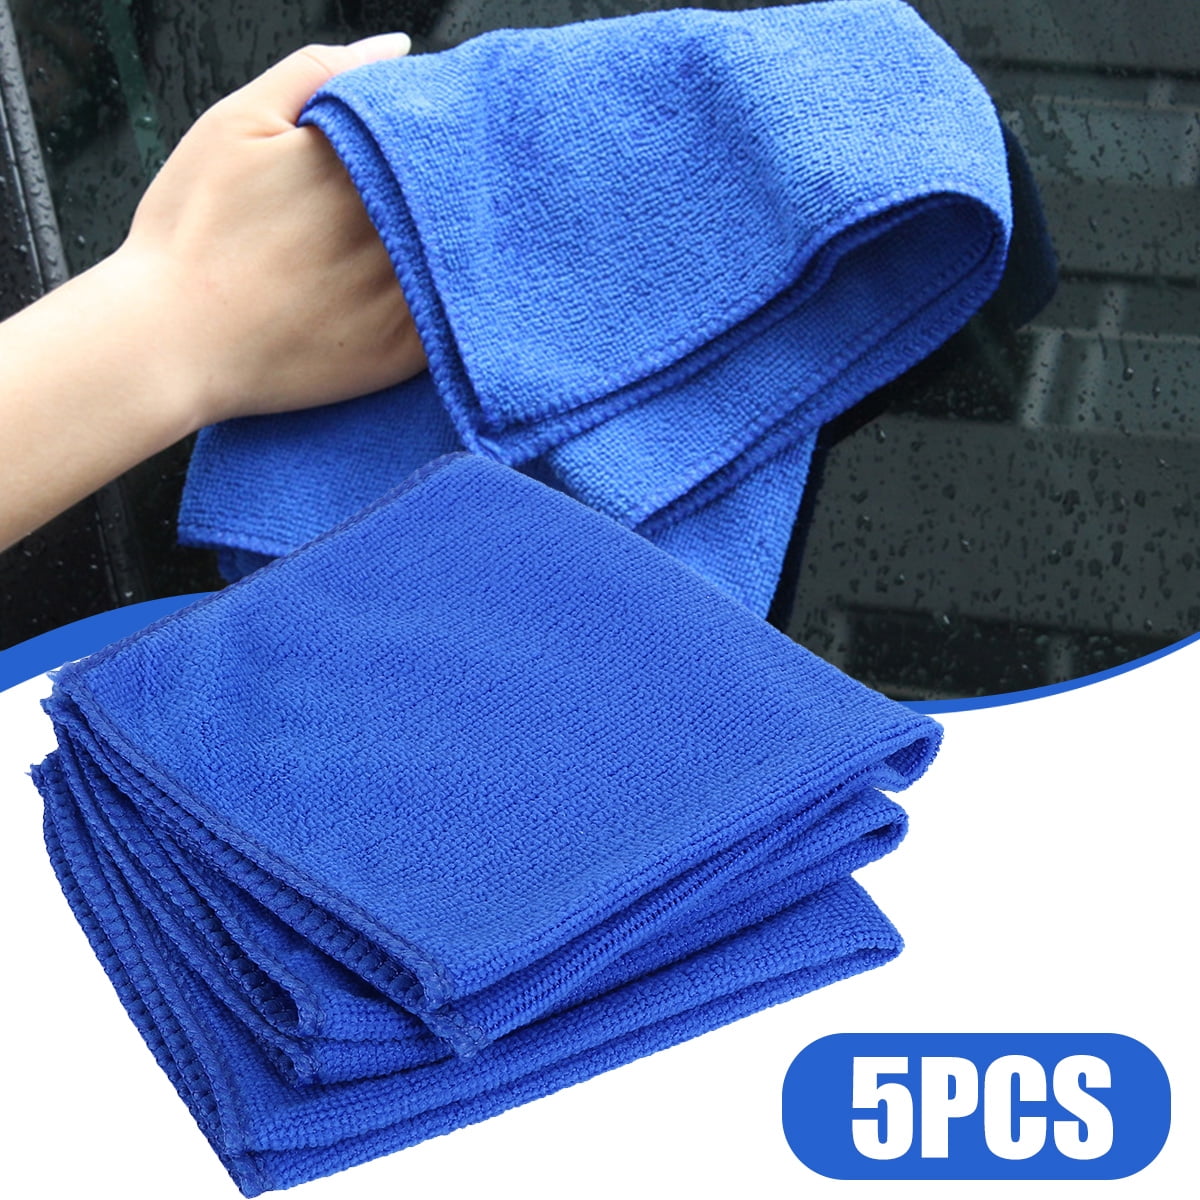 Custom Cleaning Cloth Lazy Rags Kitchen Cleaning Wipes-Wave Printing  Suppliers, OEM/ODM Factory